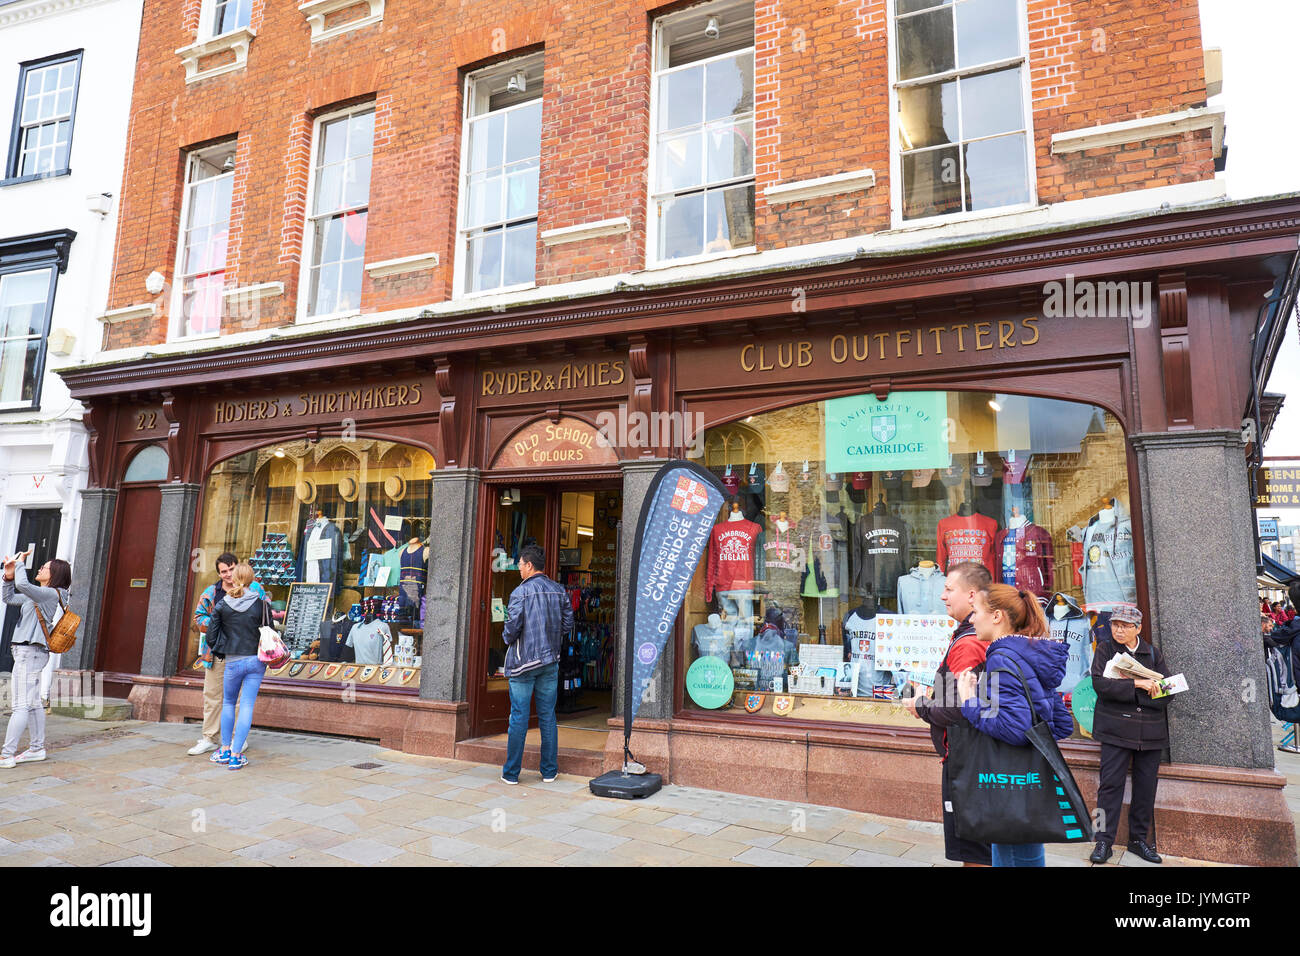 Ryder And Amies Shirtmakers And Supplier Of Official University Clothing, Kings Parade, Cambridge, UK Stock Photo